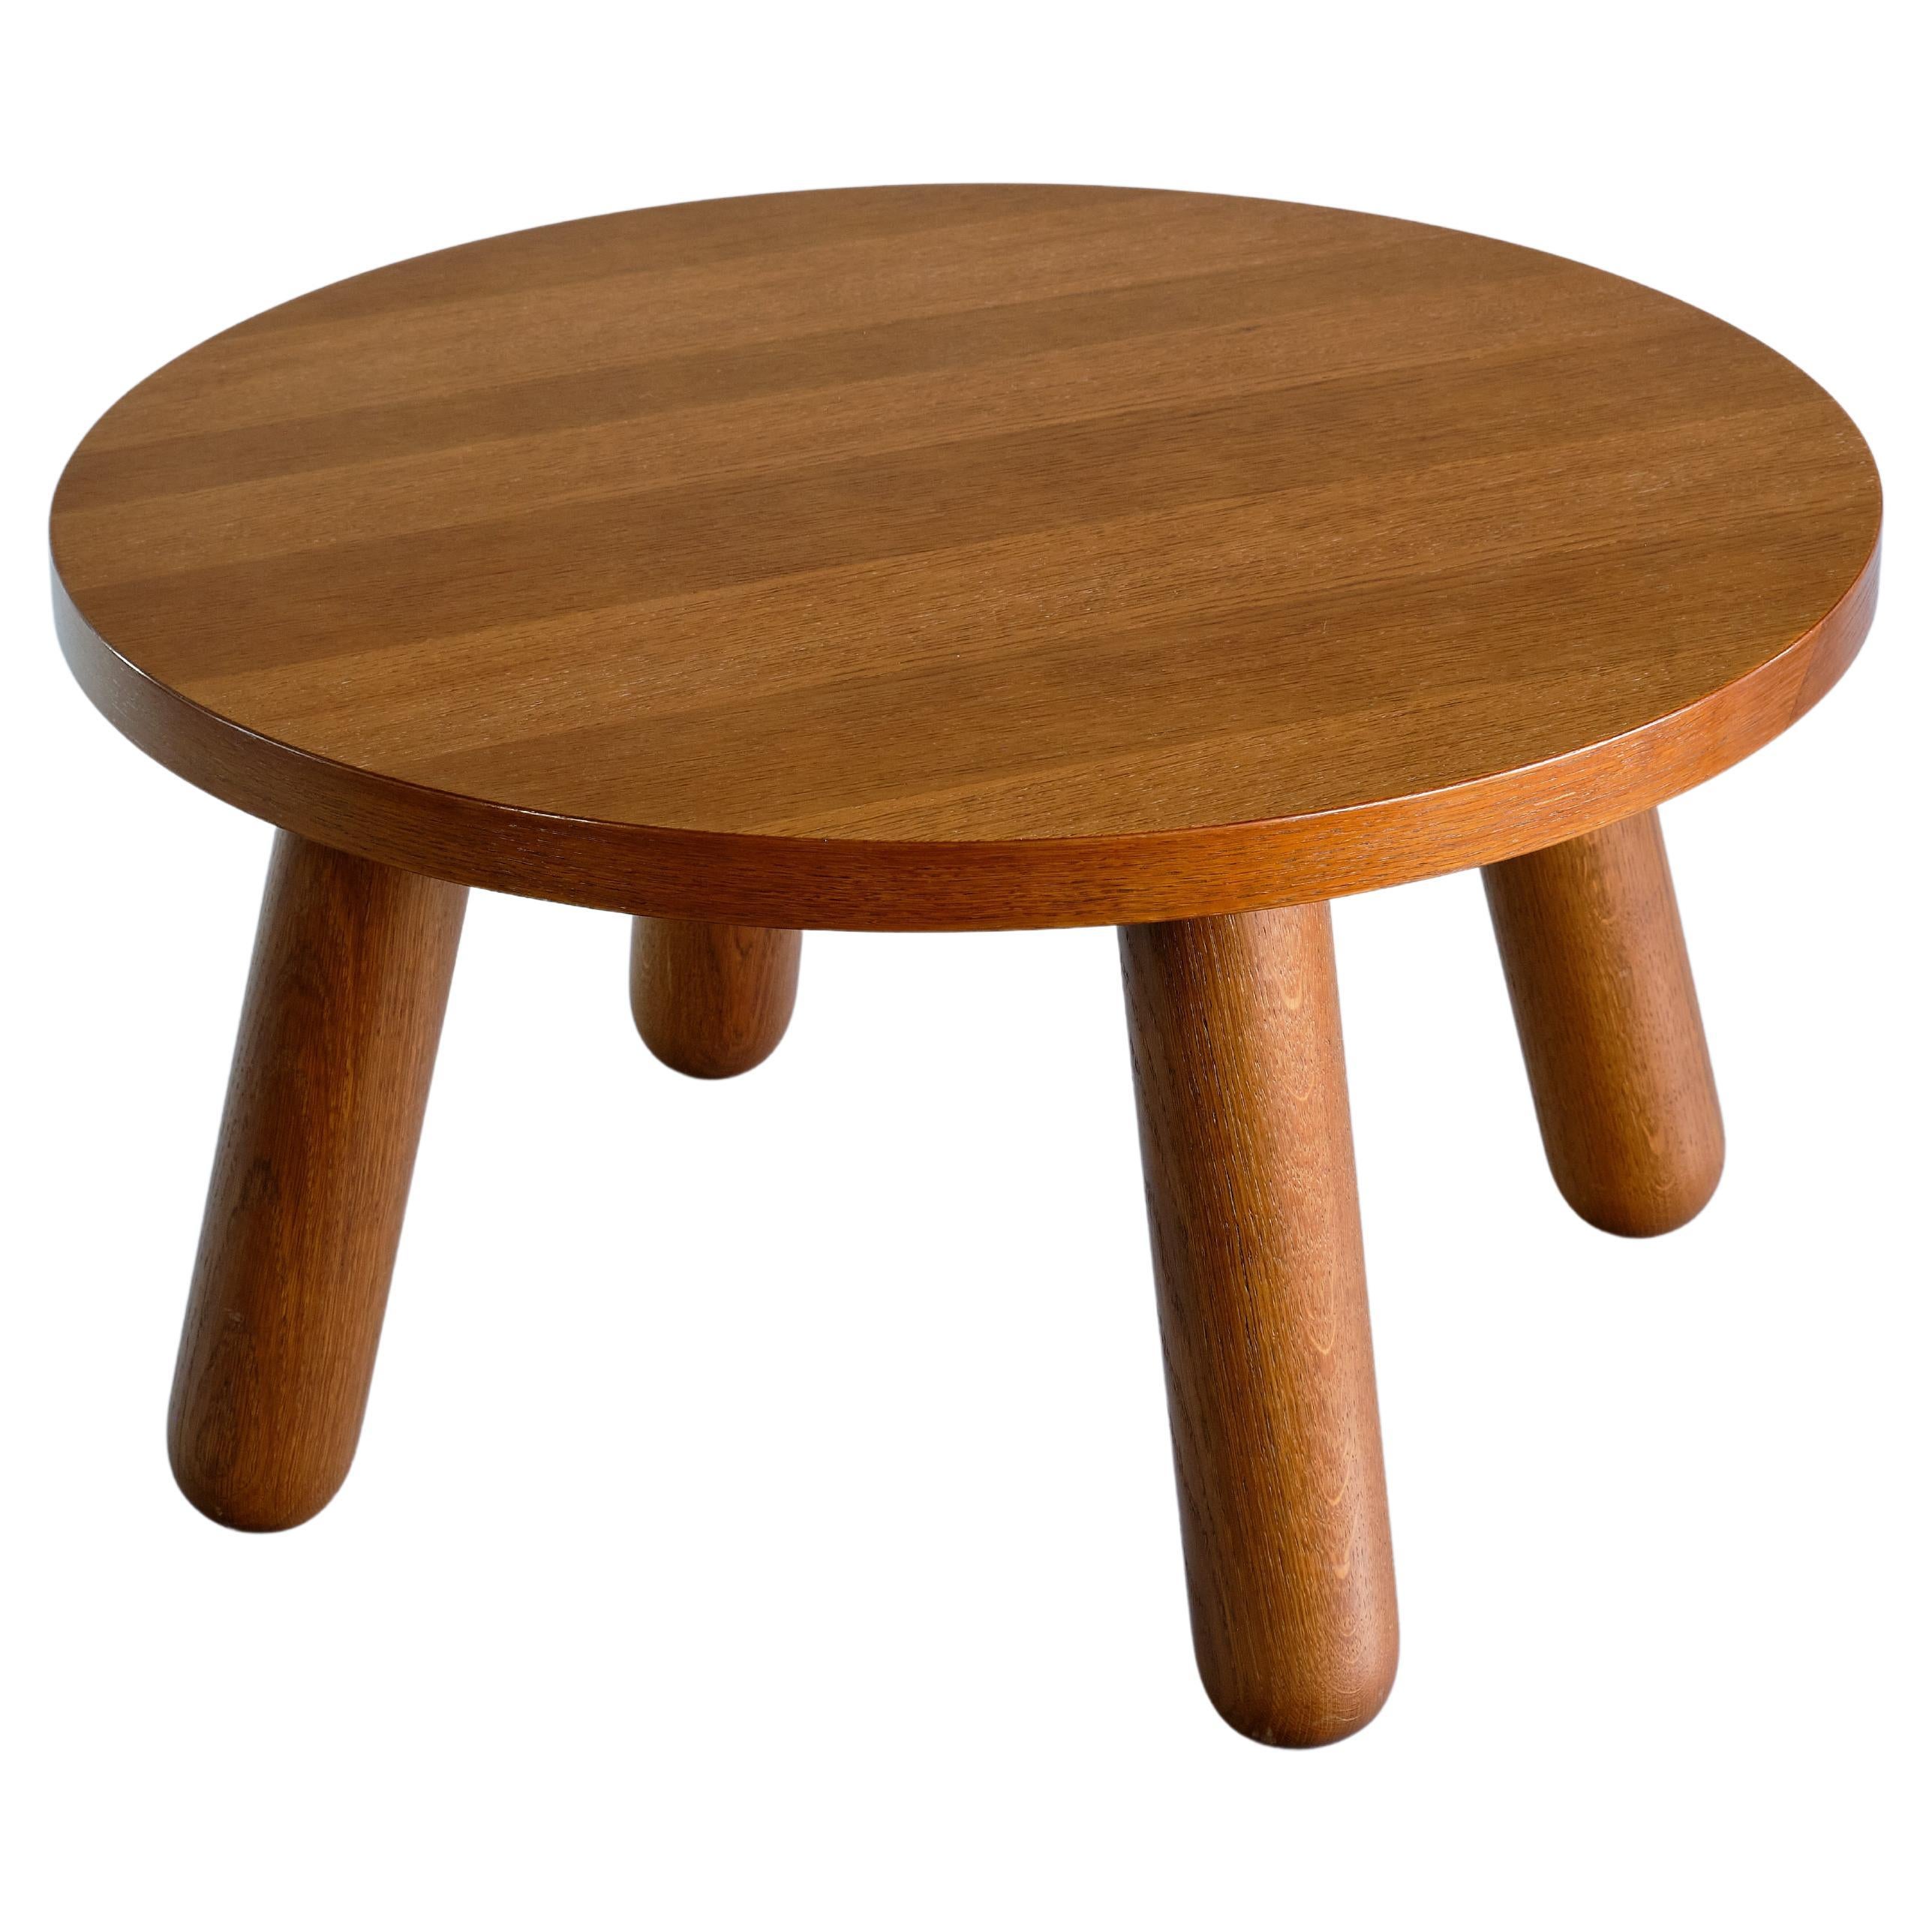 Otto Færge Round Coffee Table in Oak, Denmark, 1940s